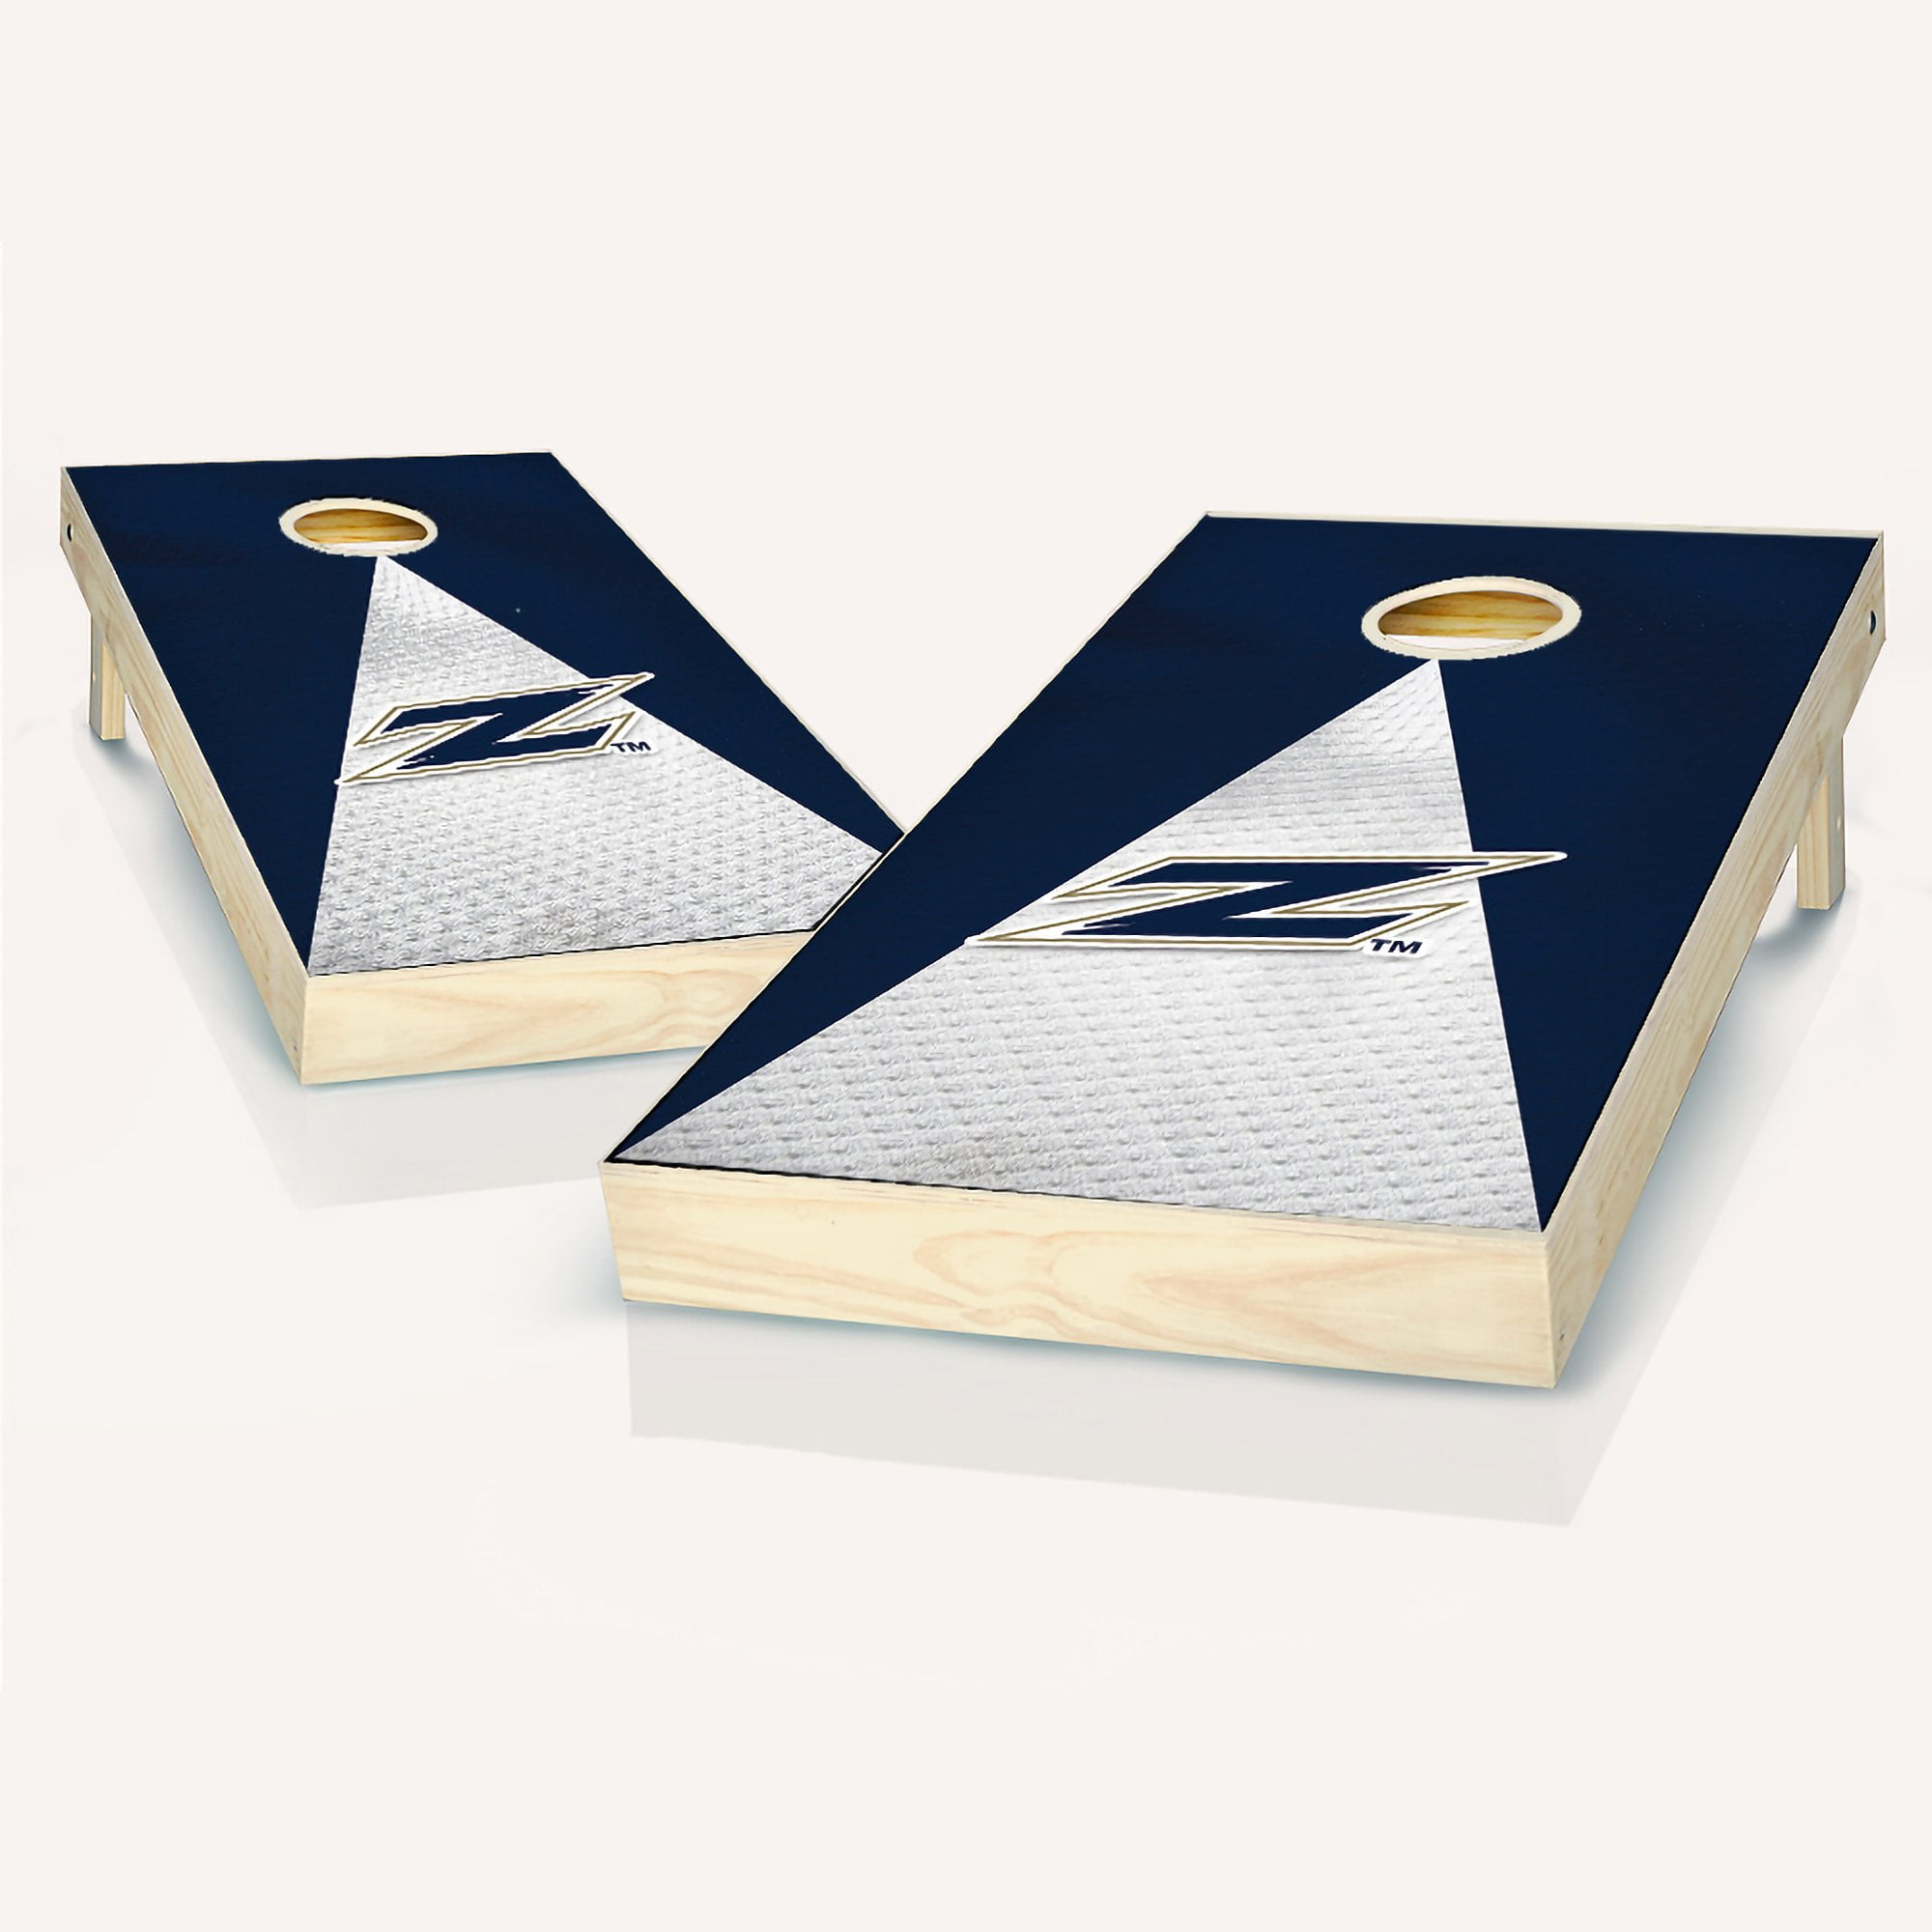 AKRON ZIPS Licensed CORNHOLE Board CARRYING CASE Storage Carry Bag 